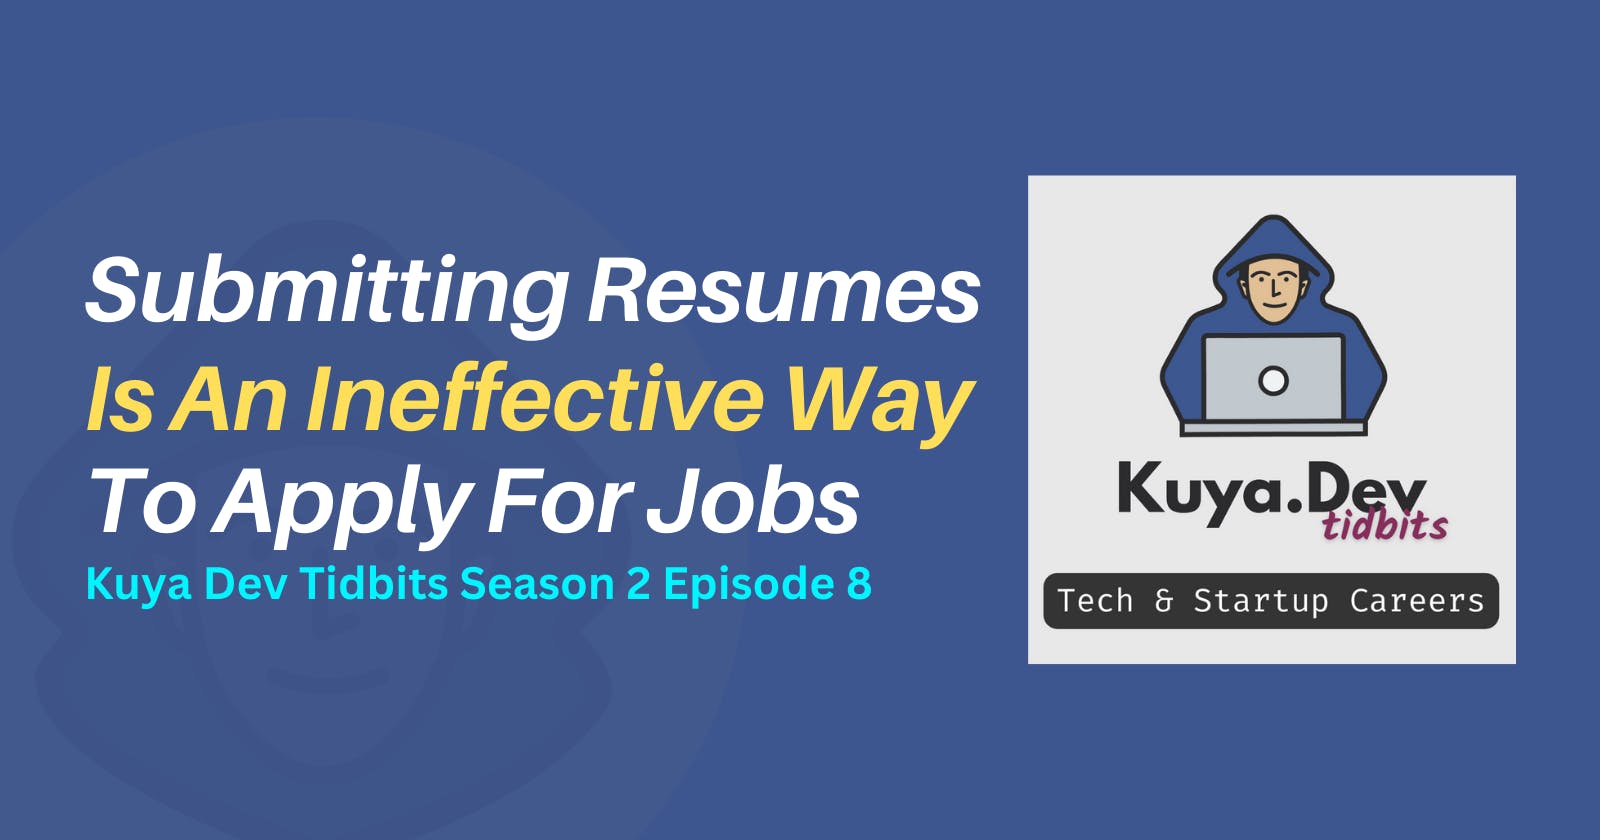 Submitting Resumes is the Most Ineffective Way of Applying for Jobs